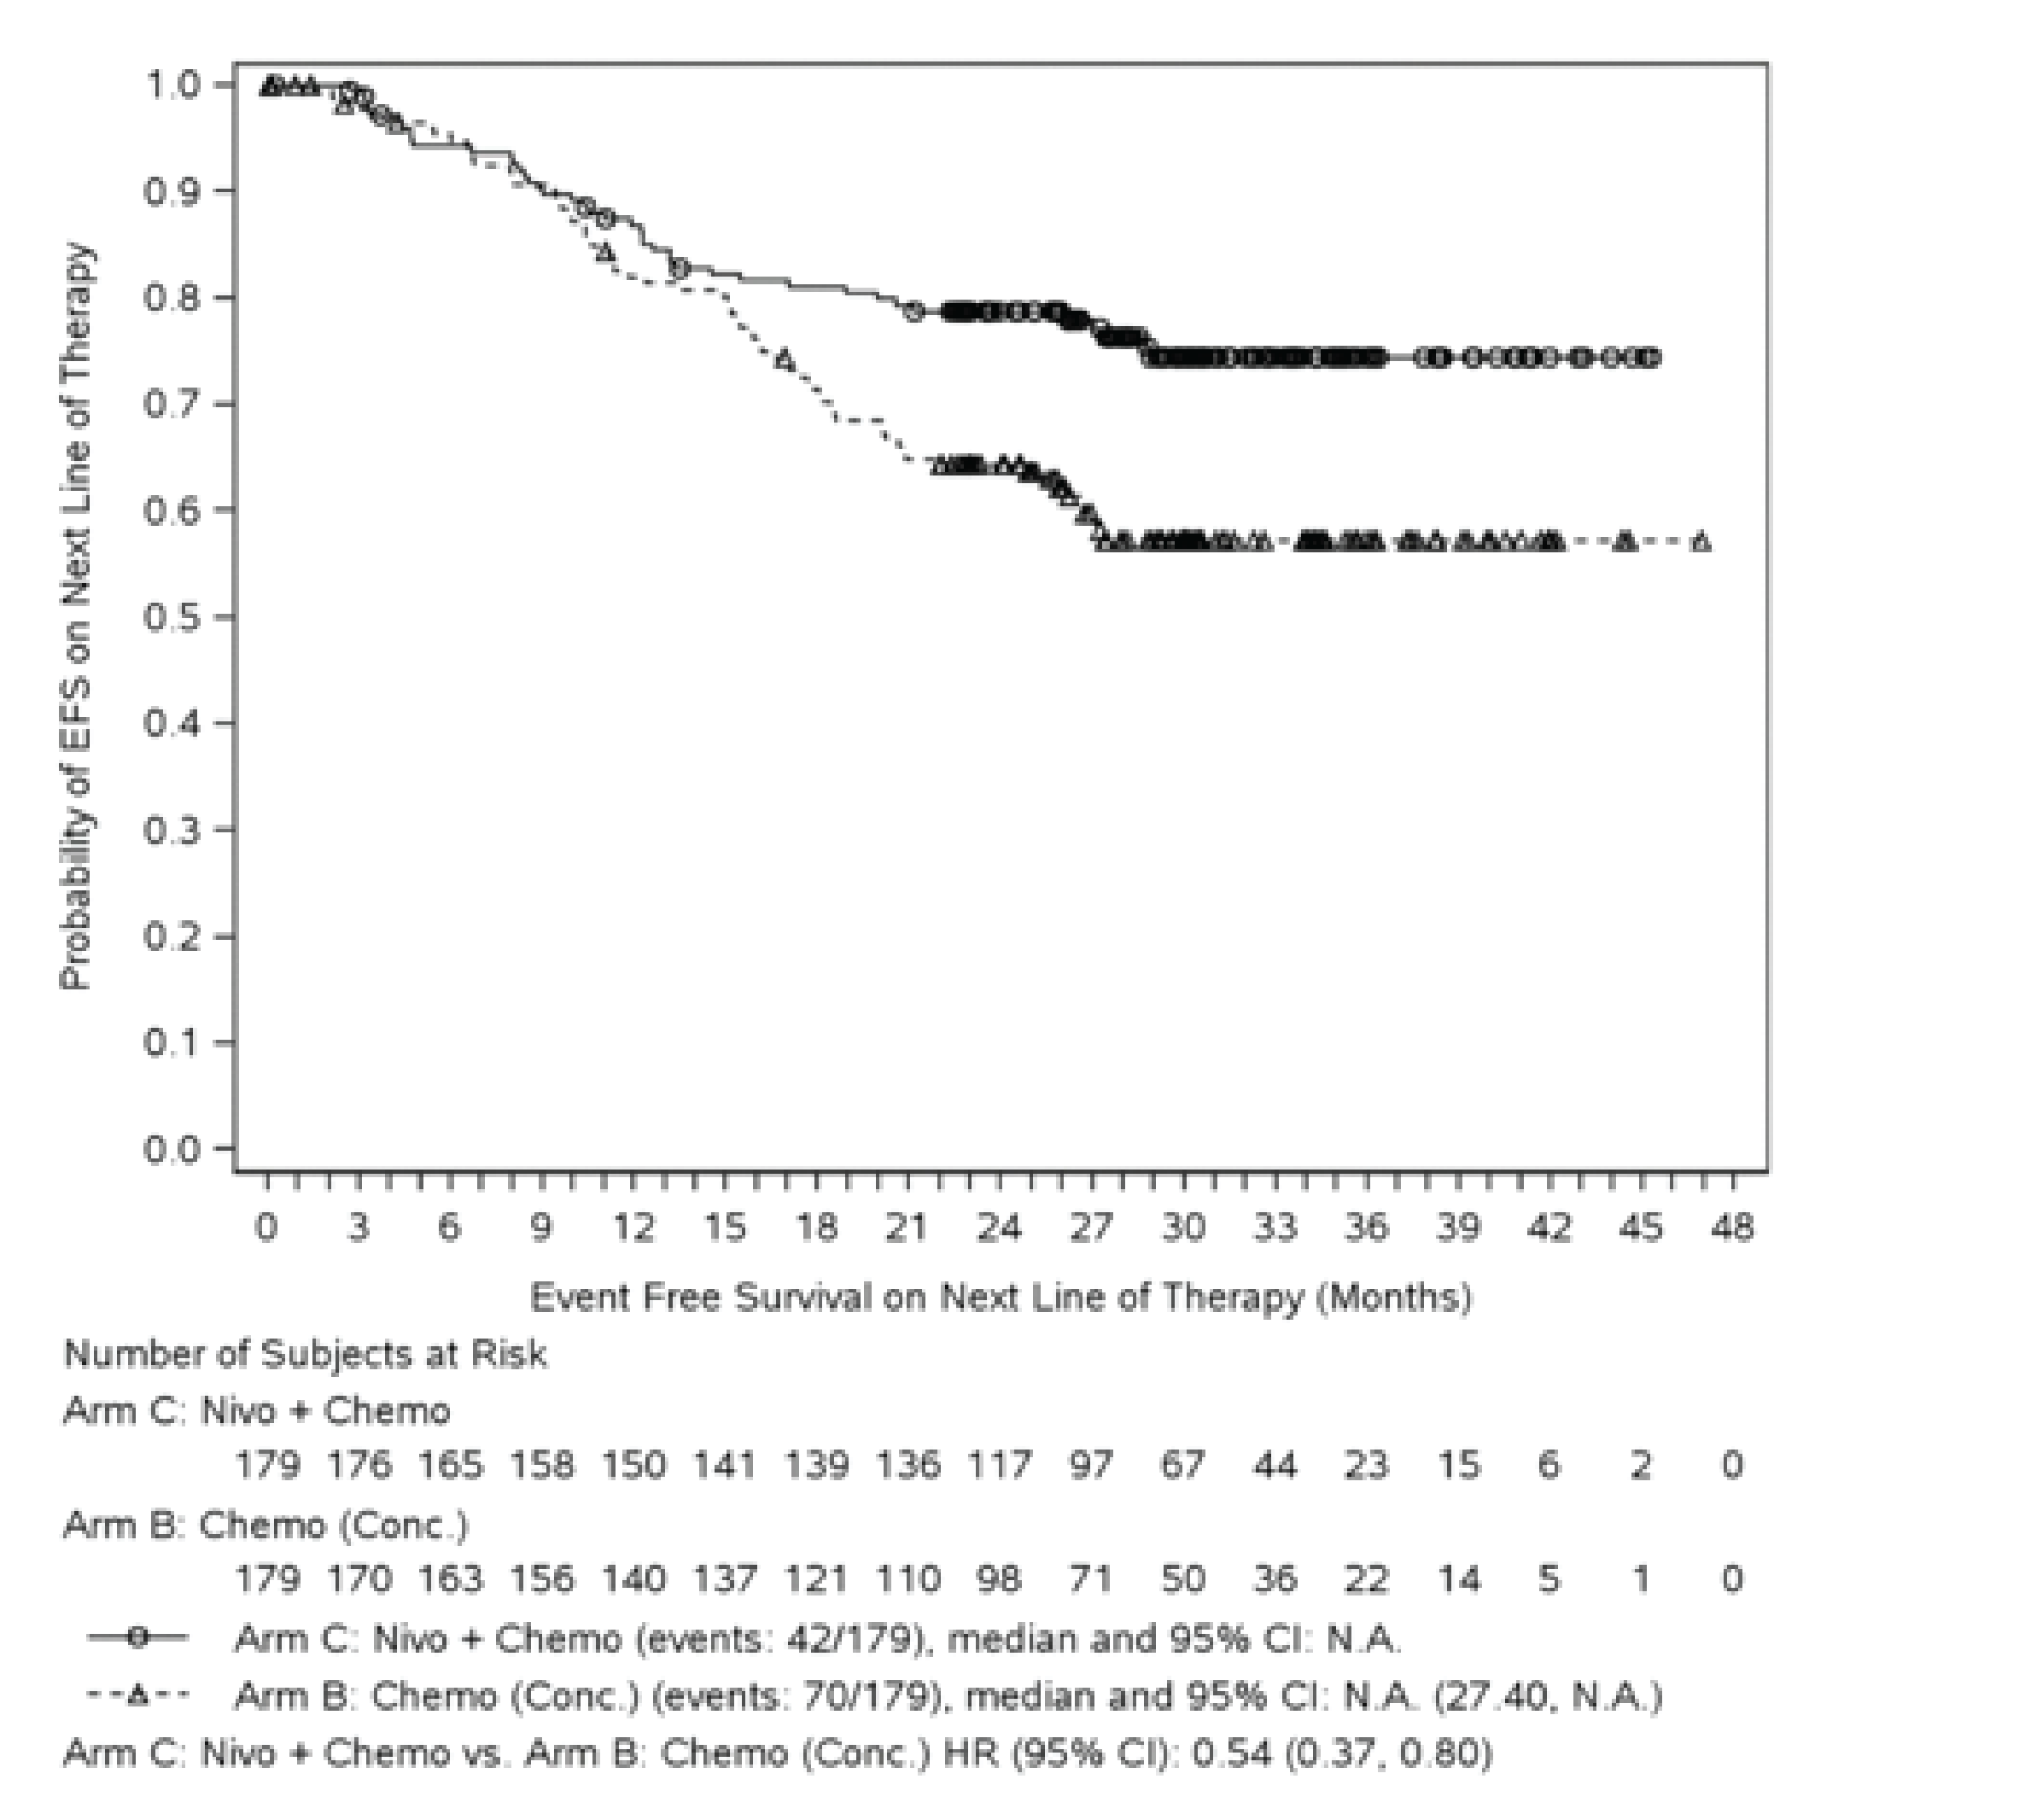 Figure presents EFS KM curves of the total number of at-risk patients in the nivolumab plus chemotherapy and chemotherapy arms from 0 to 48 months for EFS2. Both curves diverge at month 12 and remain separated at month 42.